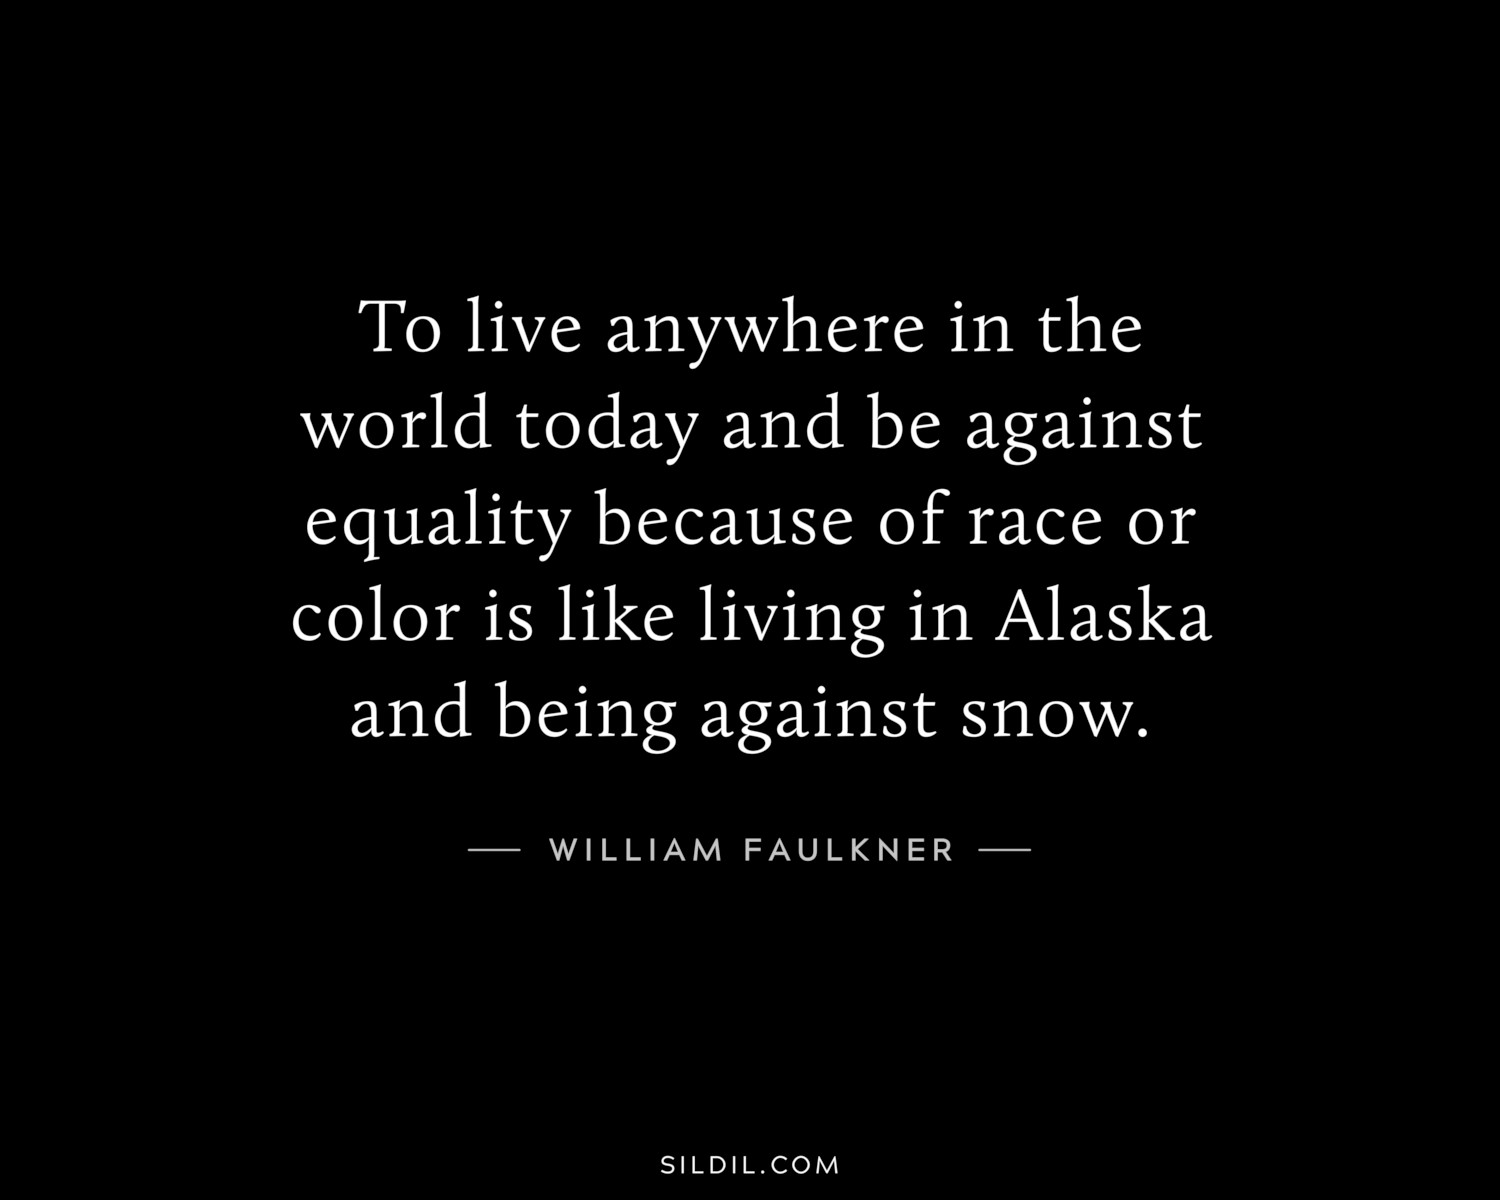 To live anywhere in the world today and be against equality because of race or color is like living in Alaska and being against snow.